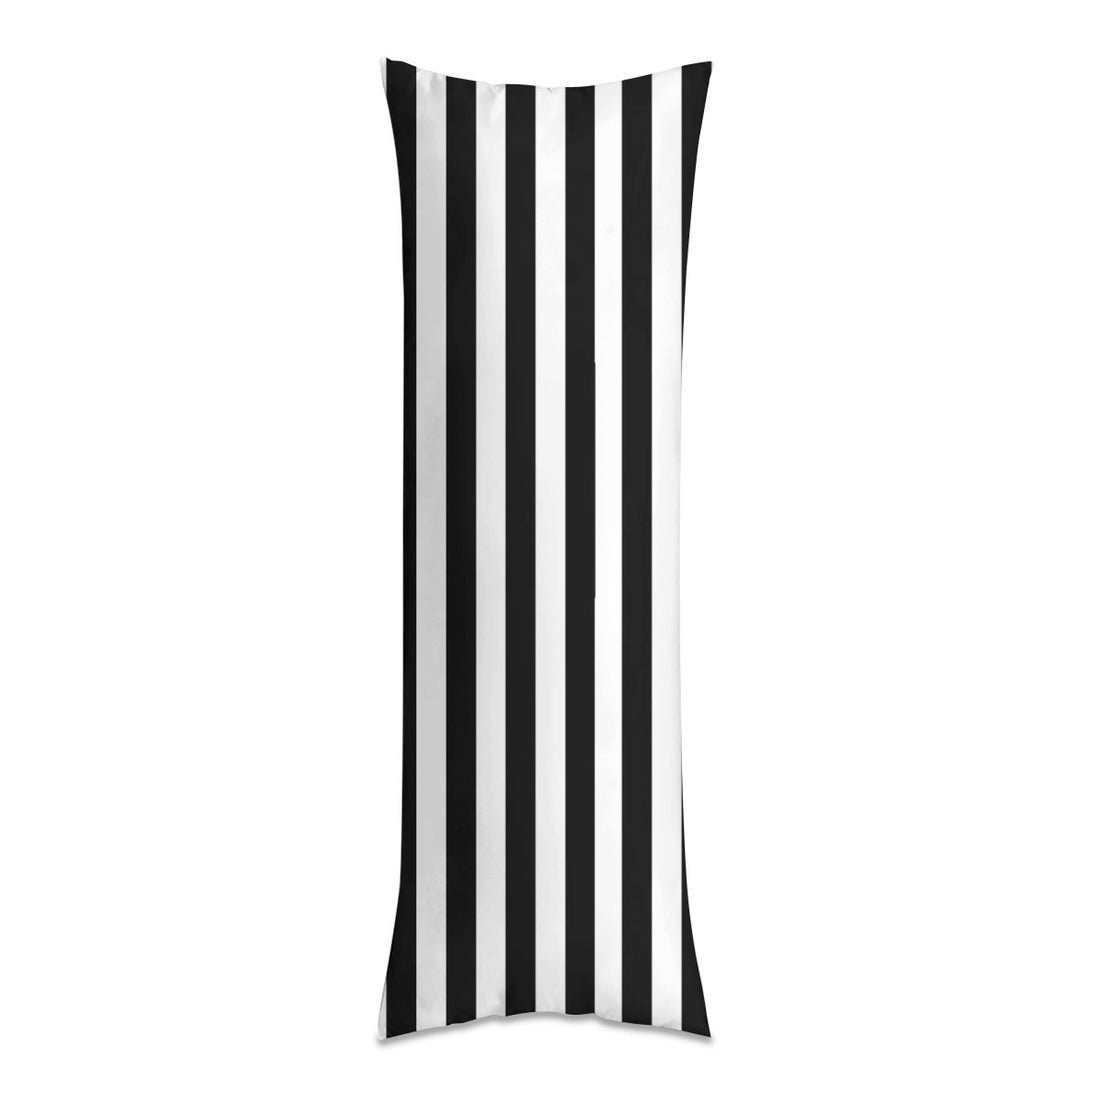 Long Pillow Cover stripes black and white Home-clothes-jewelry